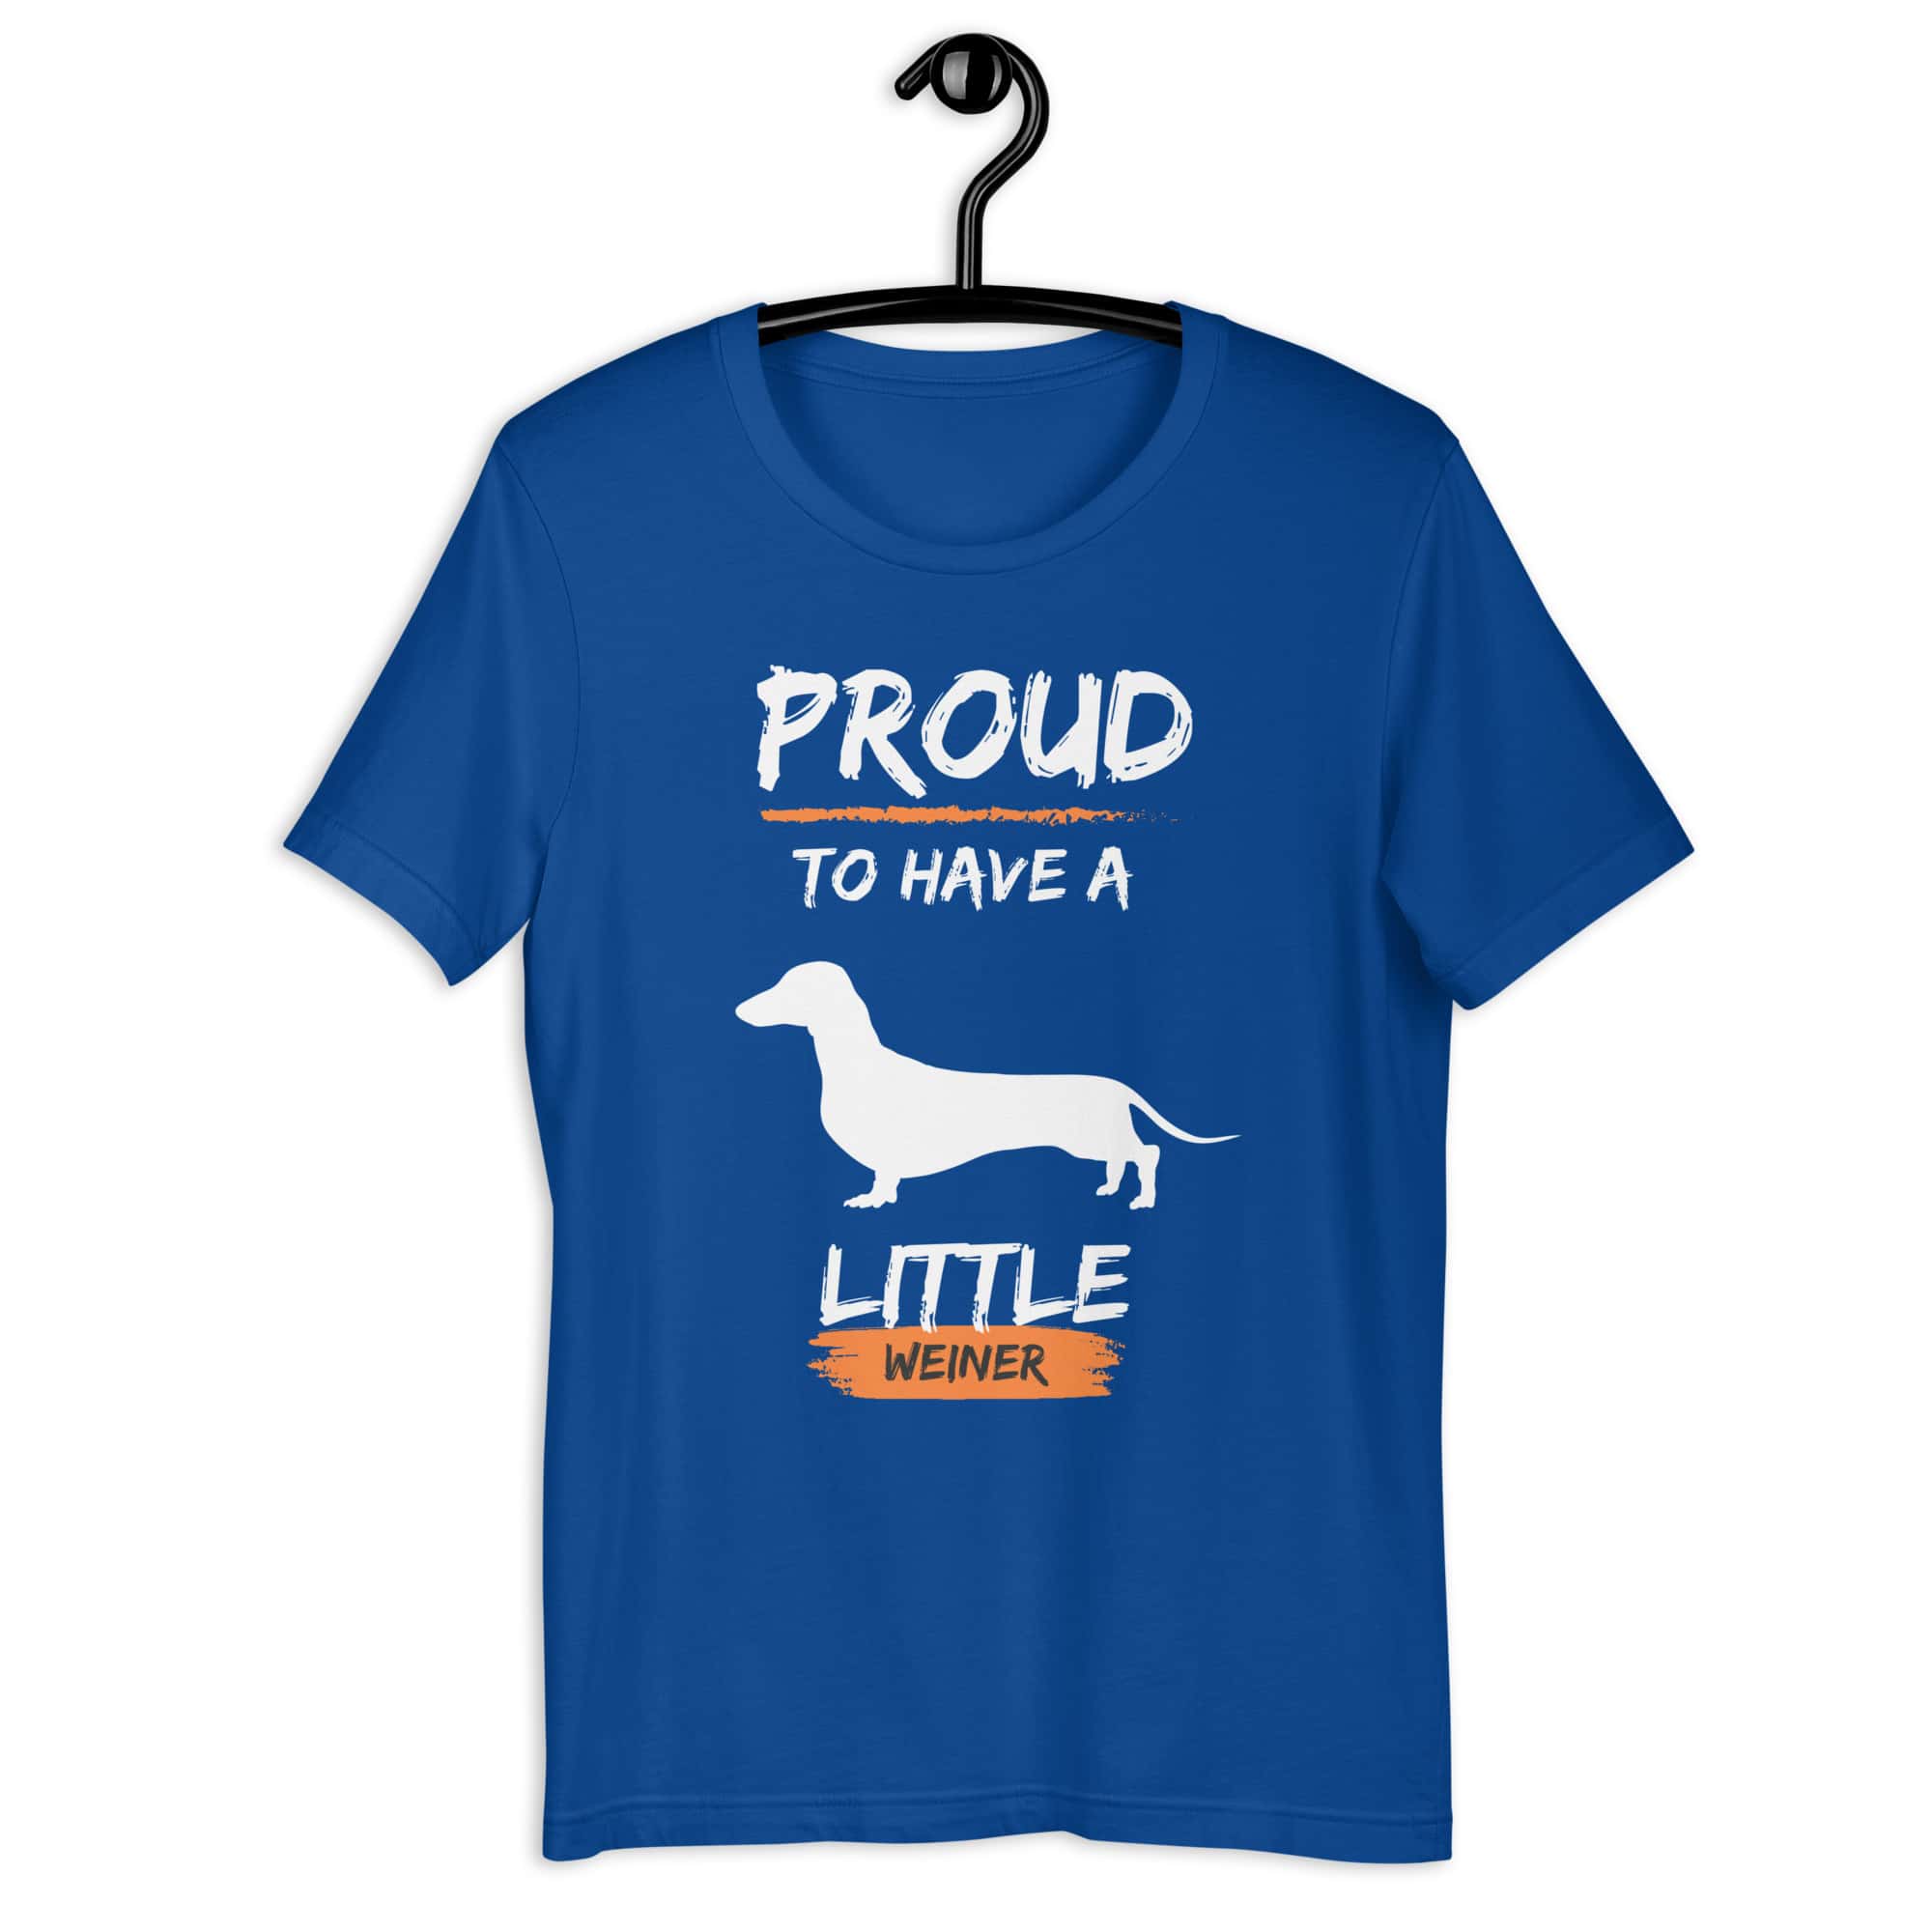 Proud To Have Little Weiner Unisex T-Shirt. Royal Blue